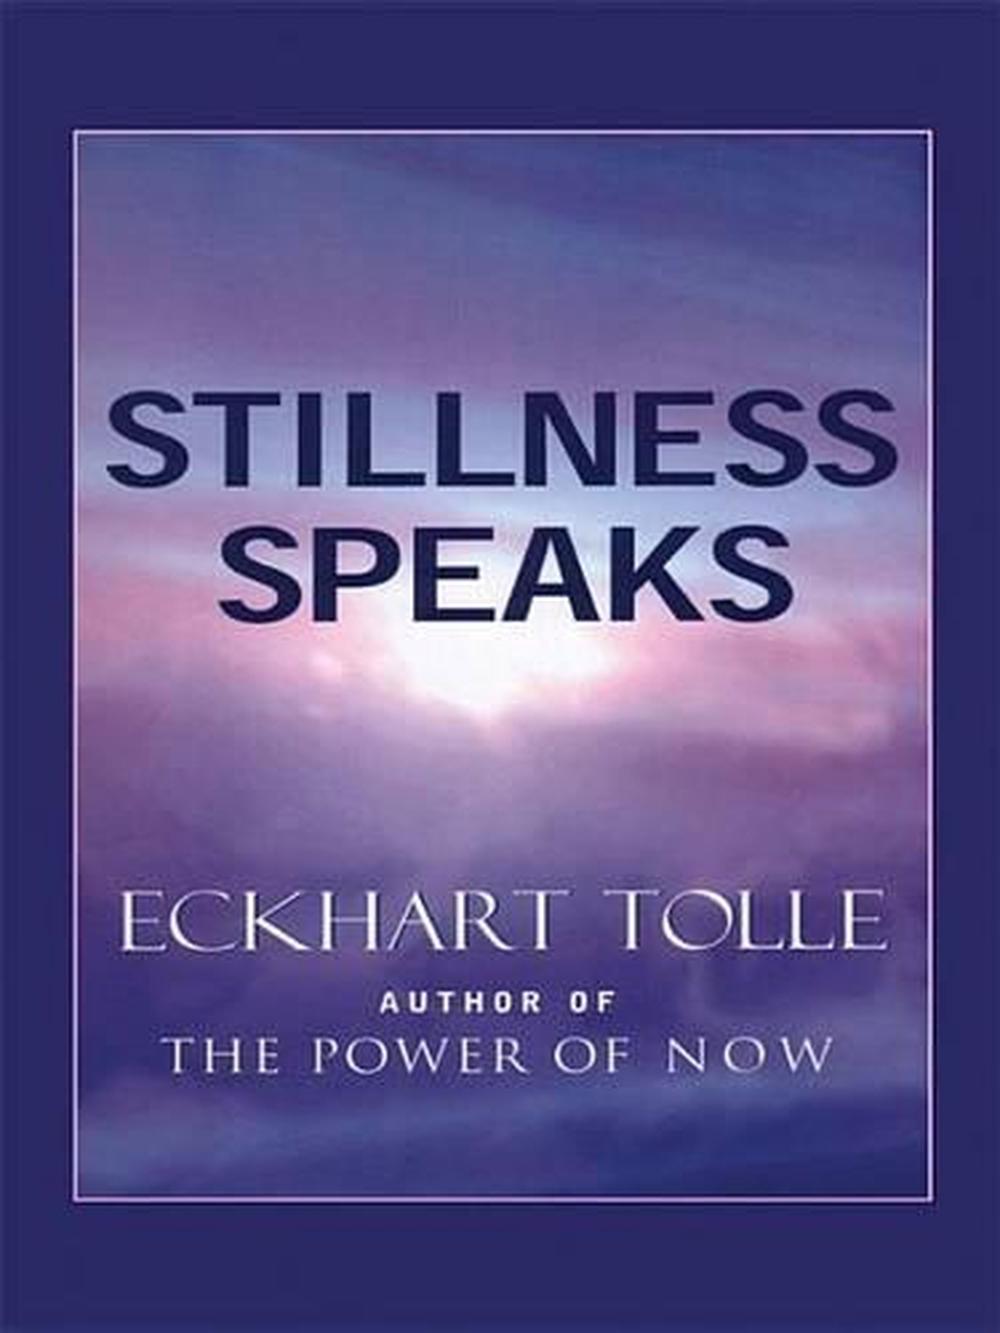 eckhart tolle books the power of now